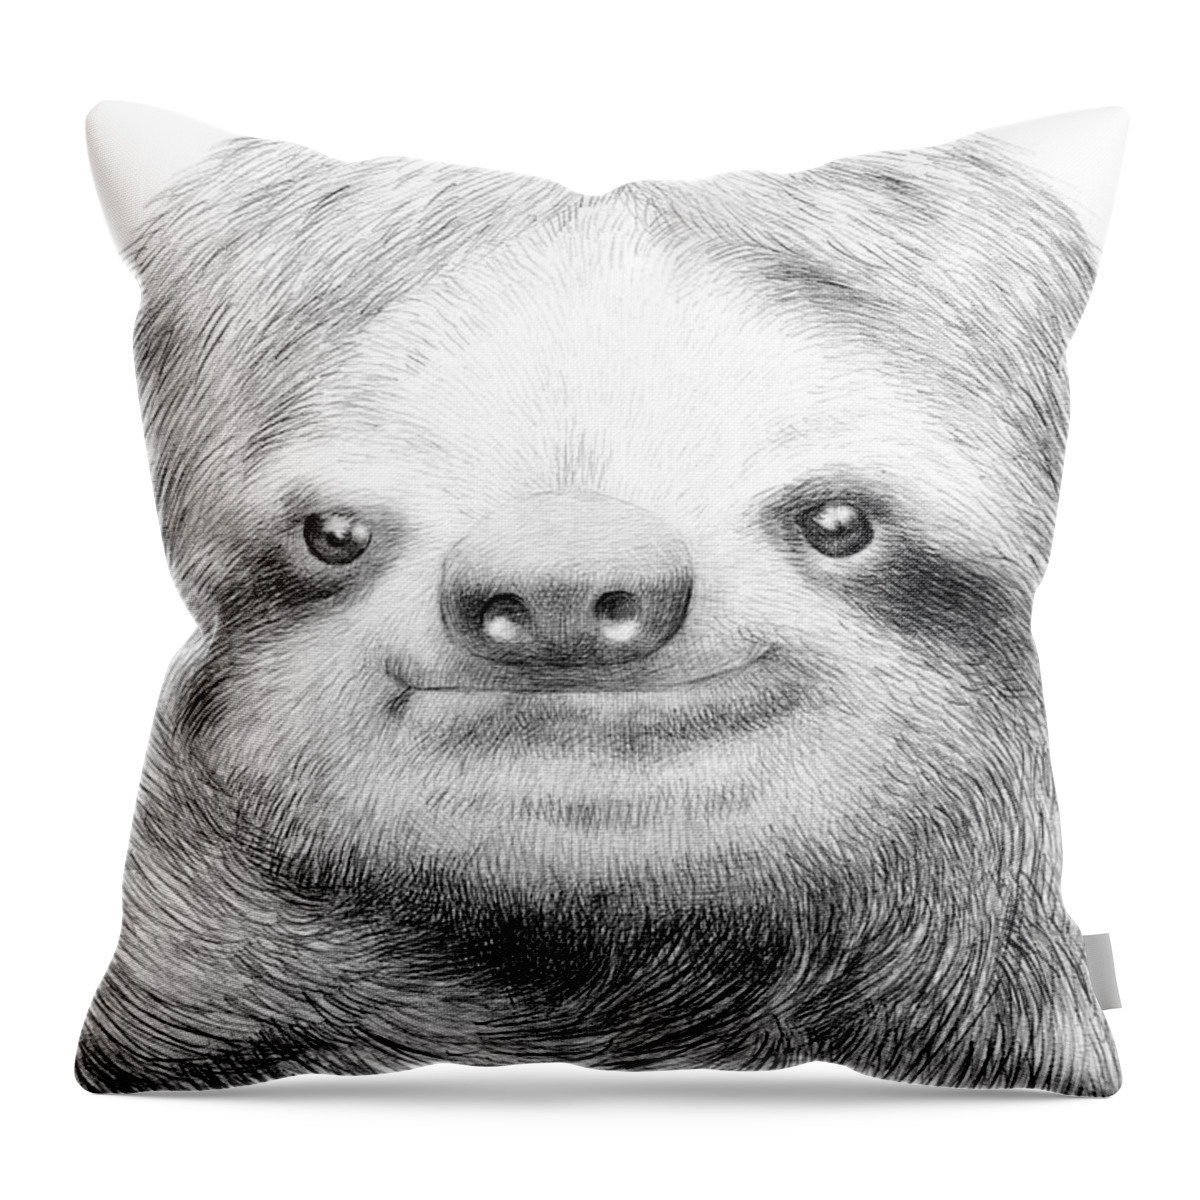 Sloth Throw Pillow featuring the drawing Sloth by Eric Fan